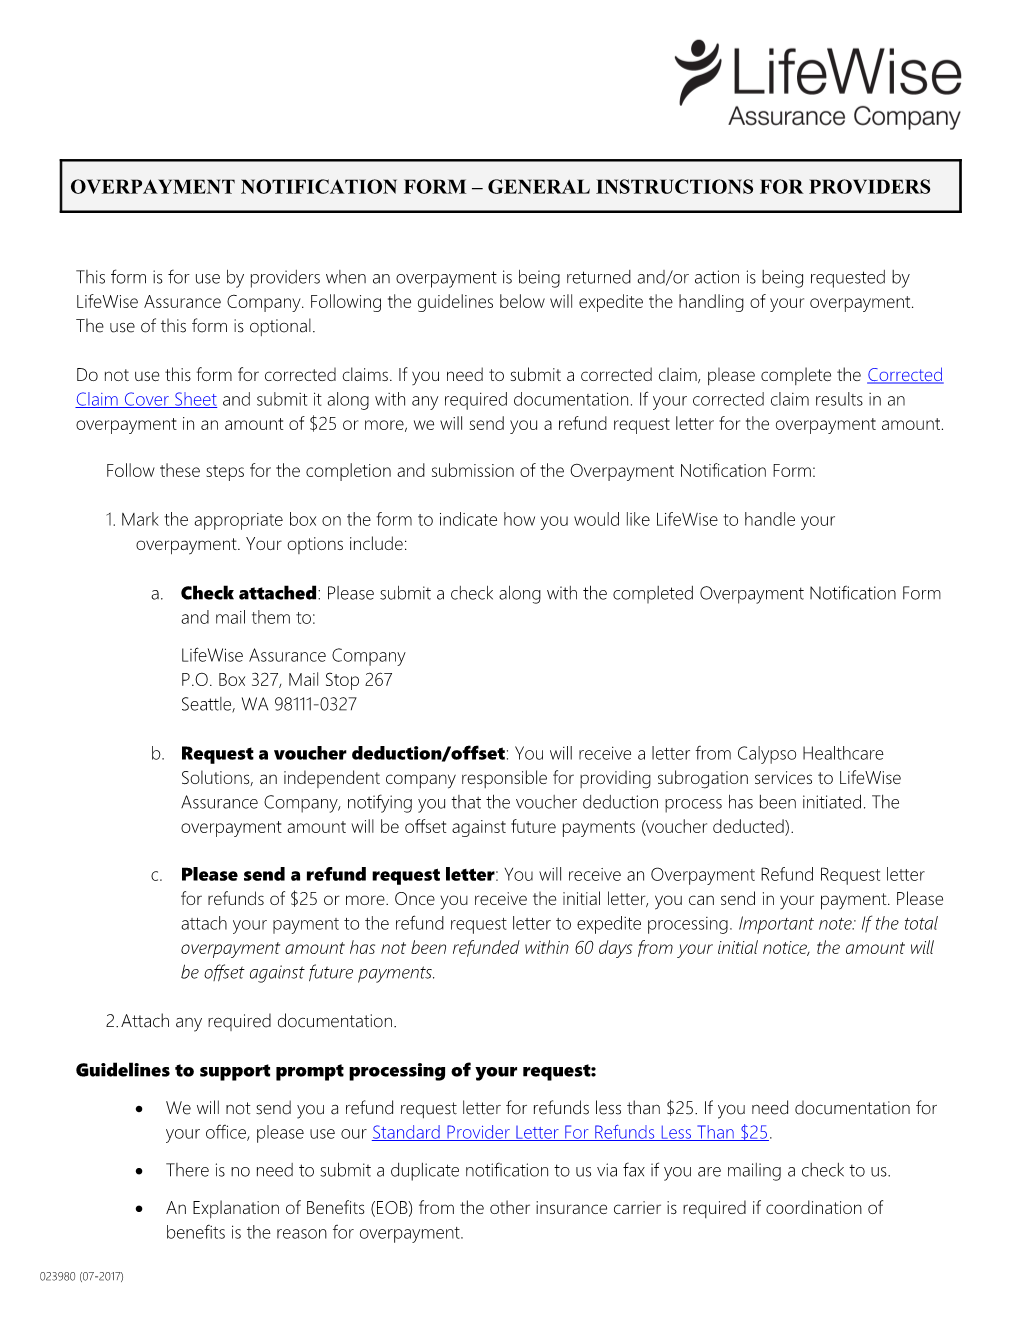 Student Insurance Overpayment Notification Form and General Instructions